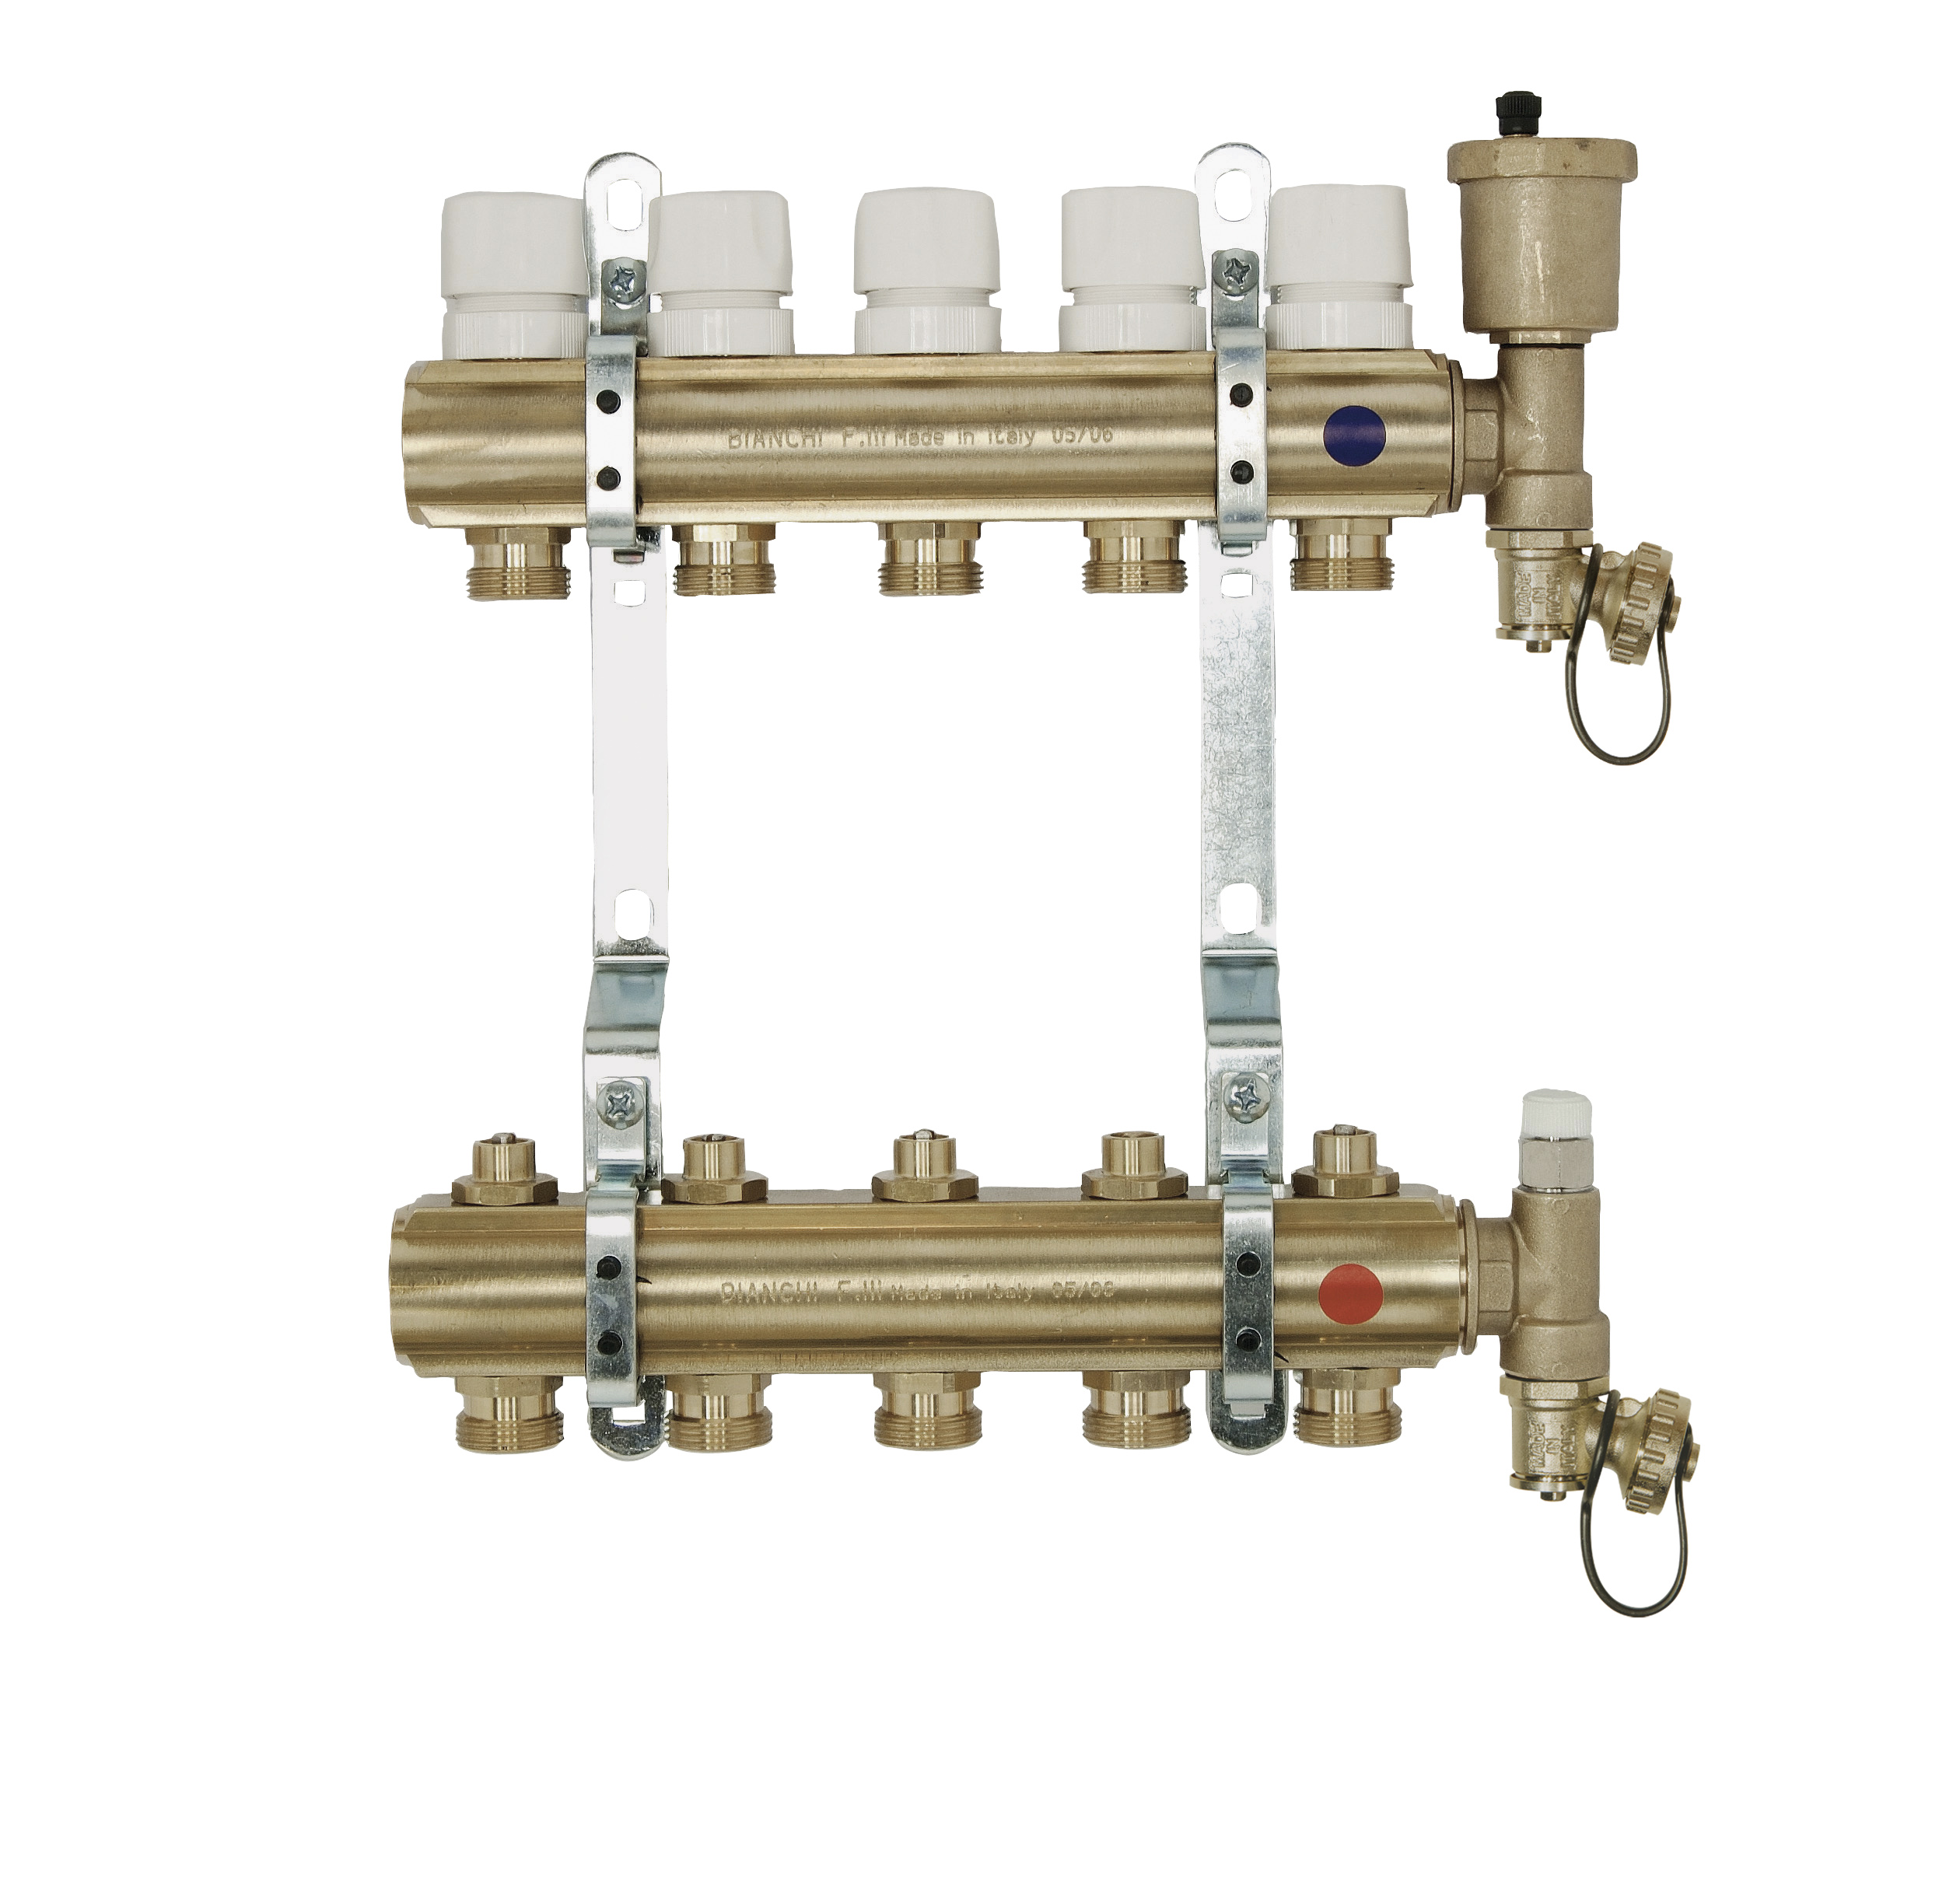 Brass manifolds therm. valves and lockshield and discharge %>